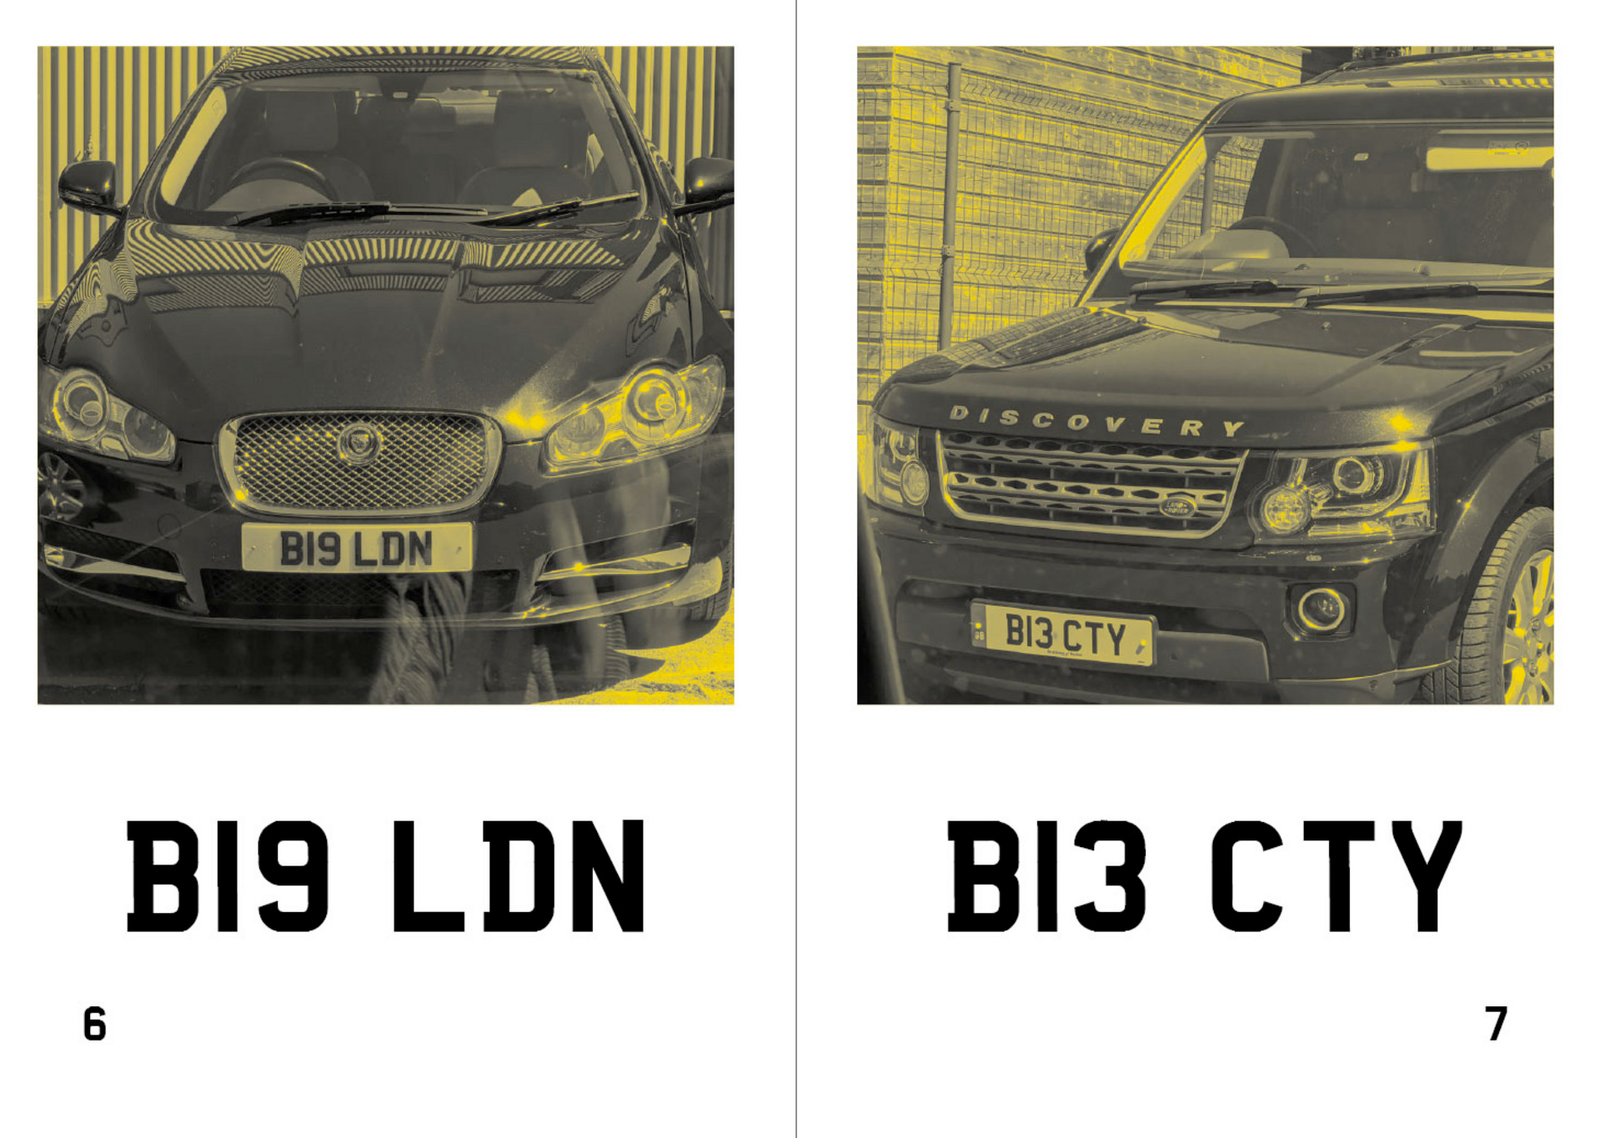 Publication spread of two black and yellow cars with custom licence plates